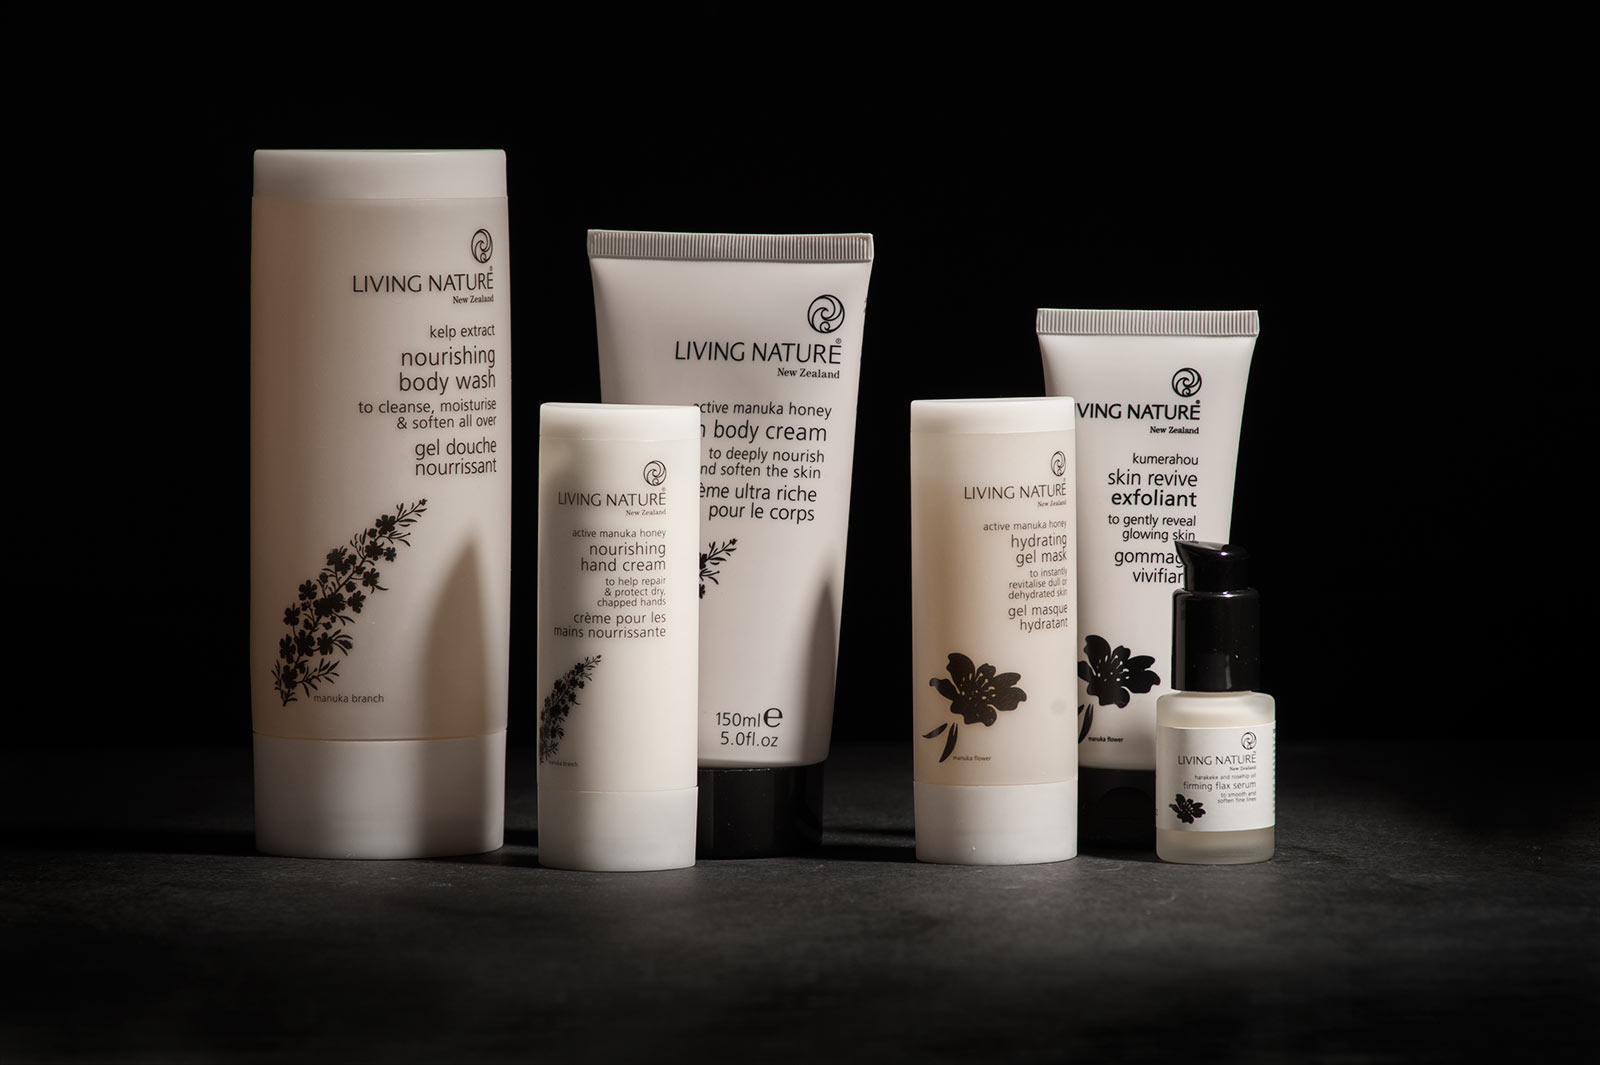 A variety of Living Nature beauty products are displayed without their boxes